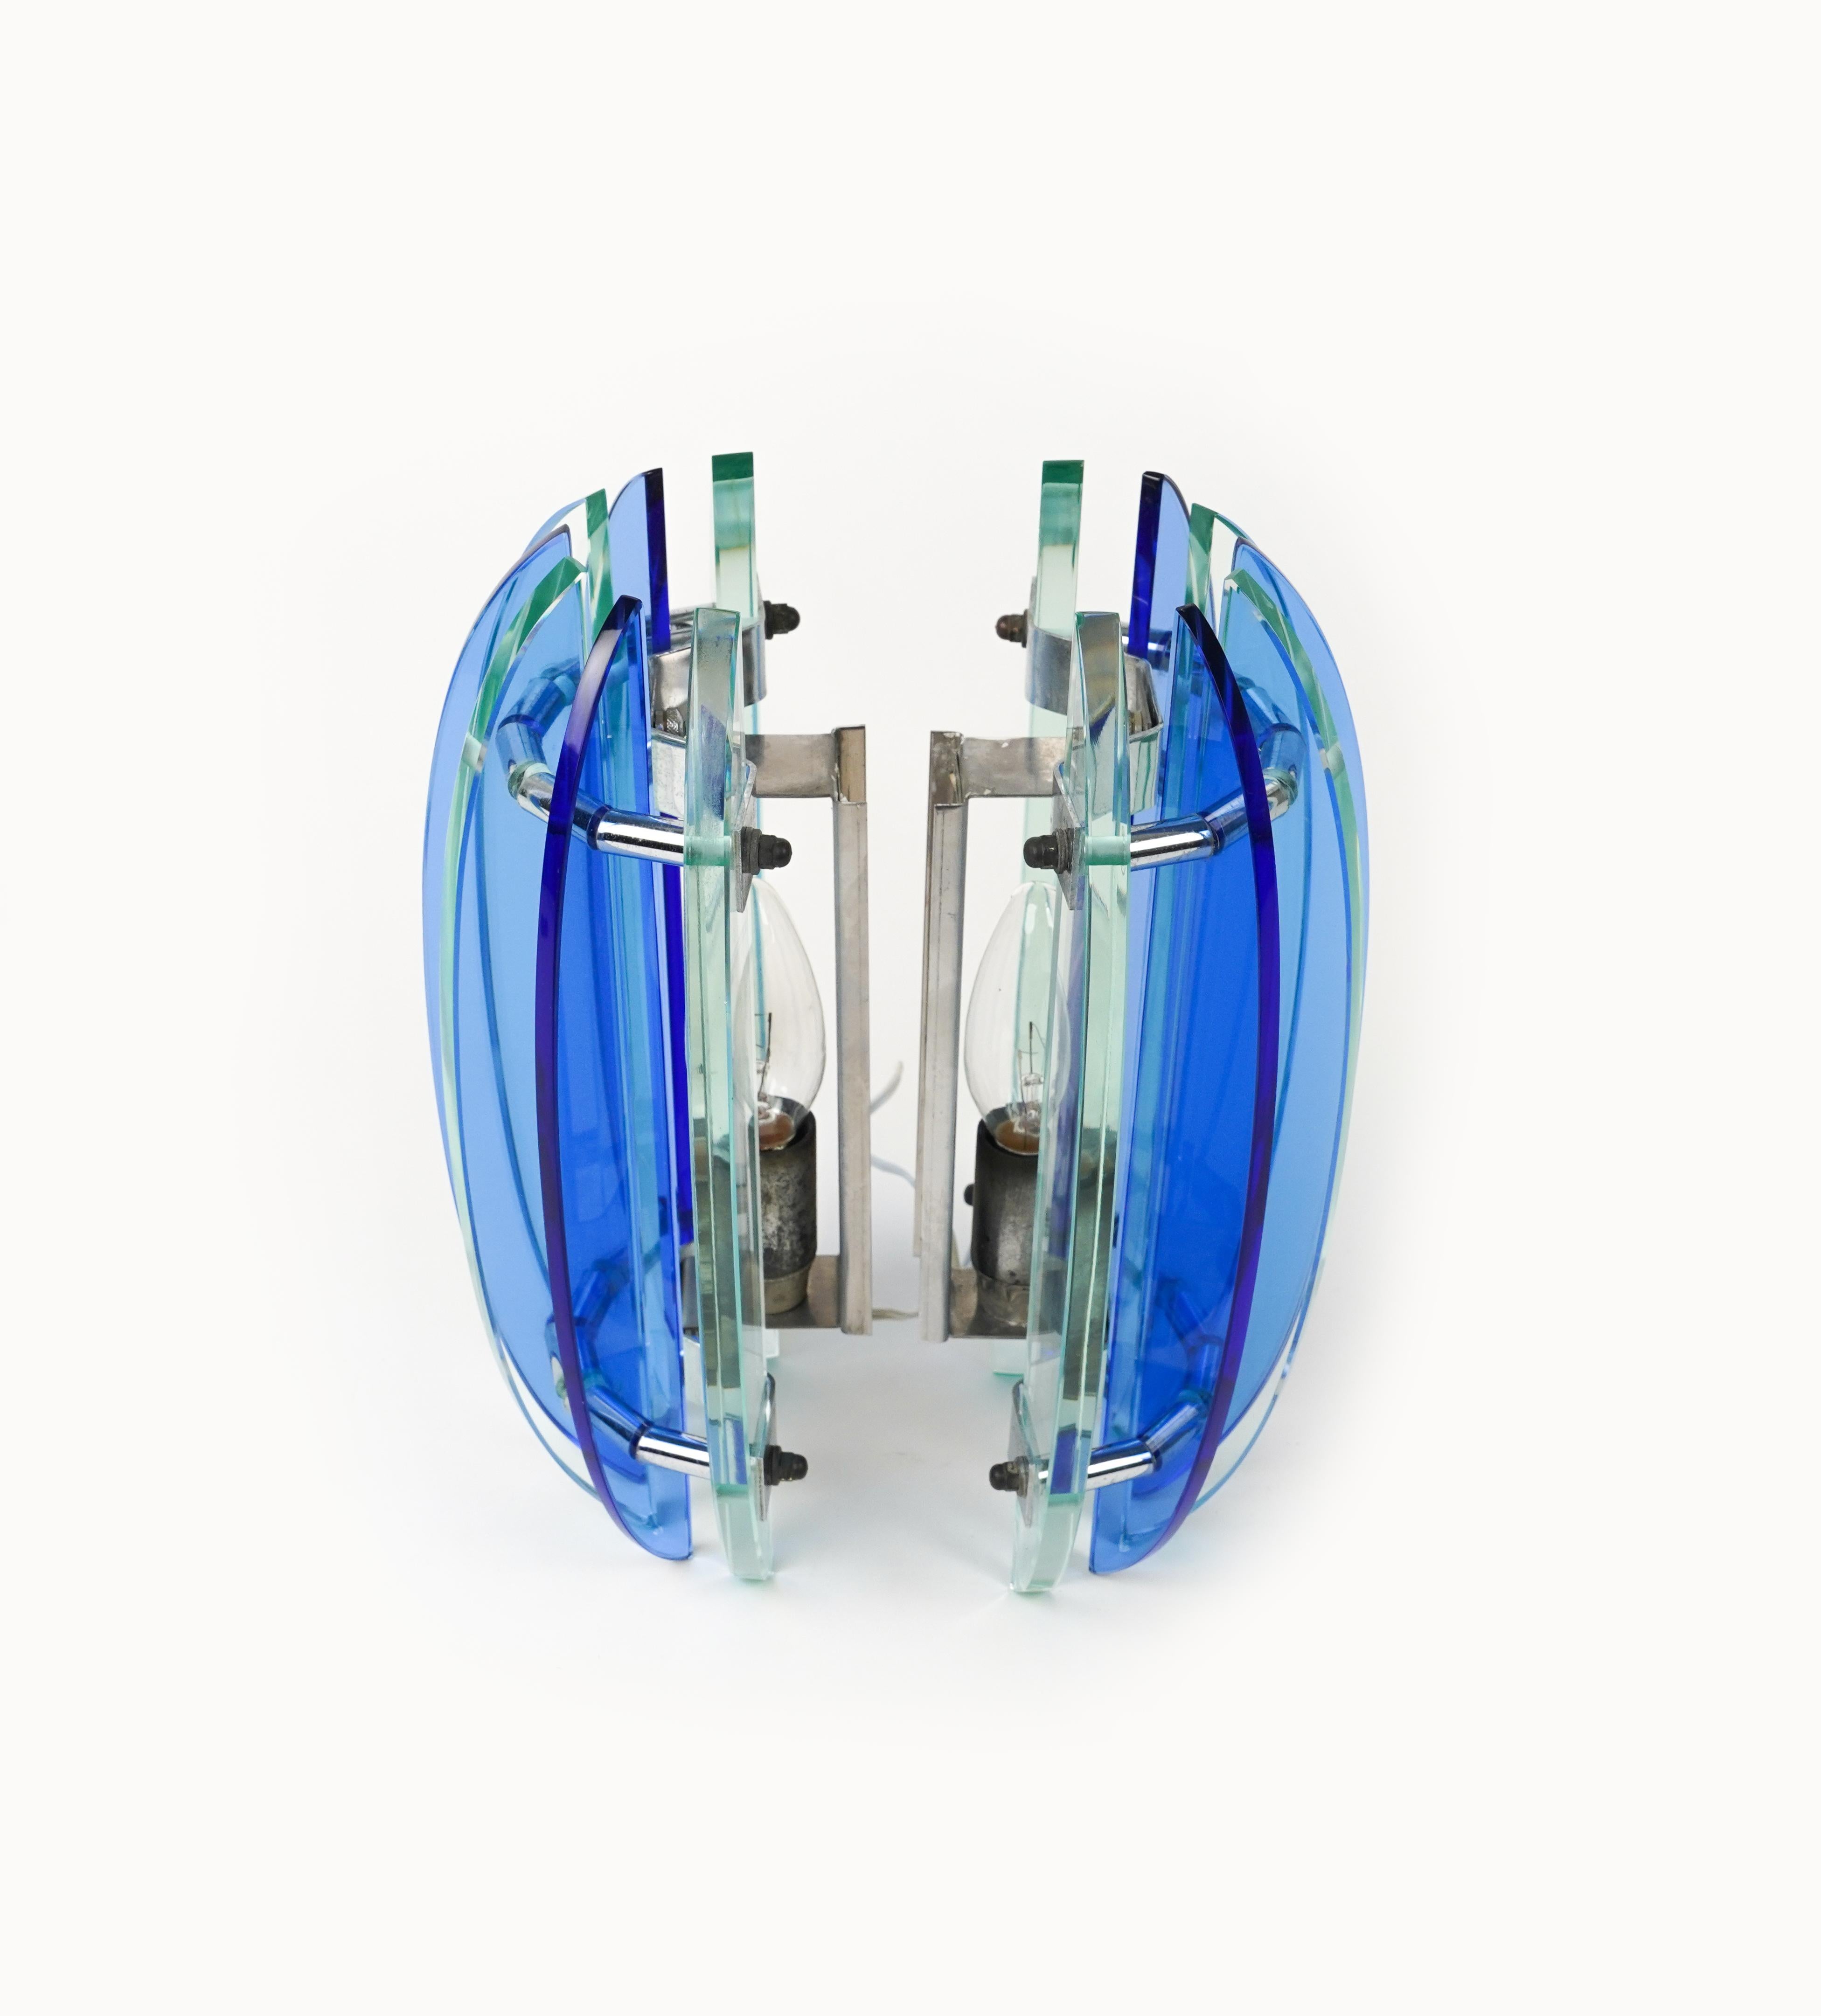 Late 20th Century Midcentury Pair of Wall Sconces in Colored Glass & Chrome by Veca, Italy, 1970s For Sale